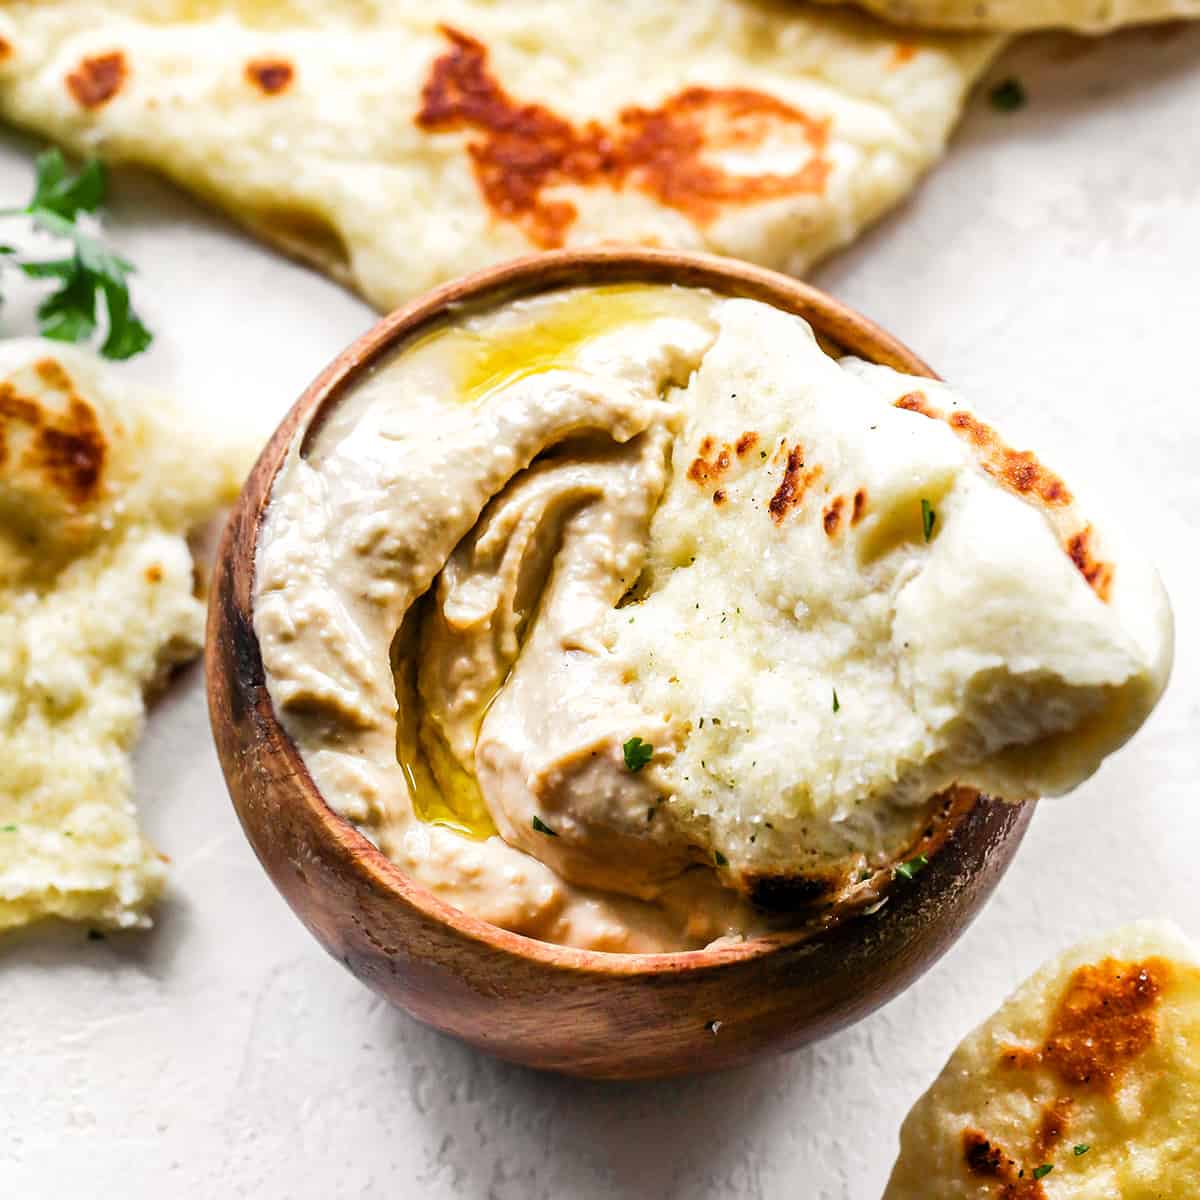 a piece of naan being dipped into a bowl of hummus